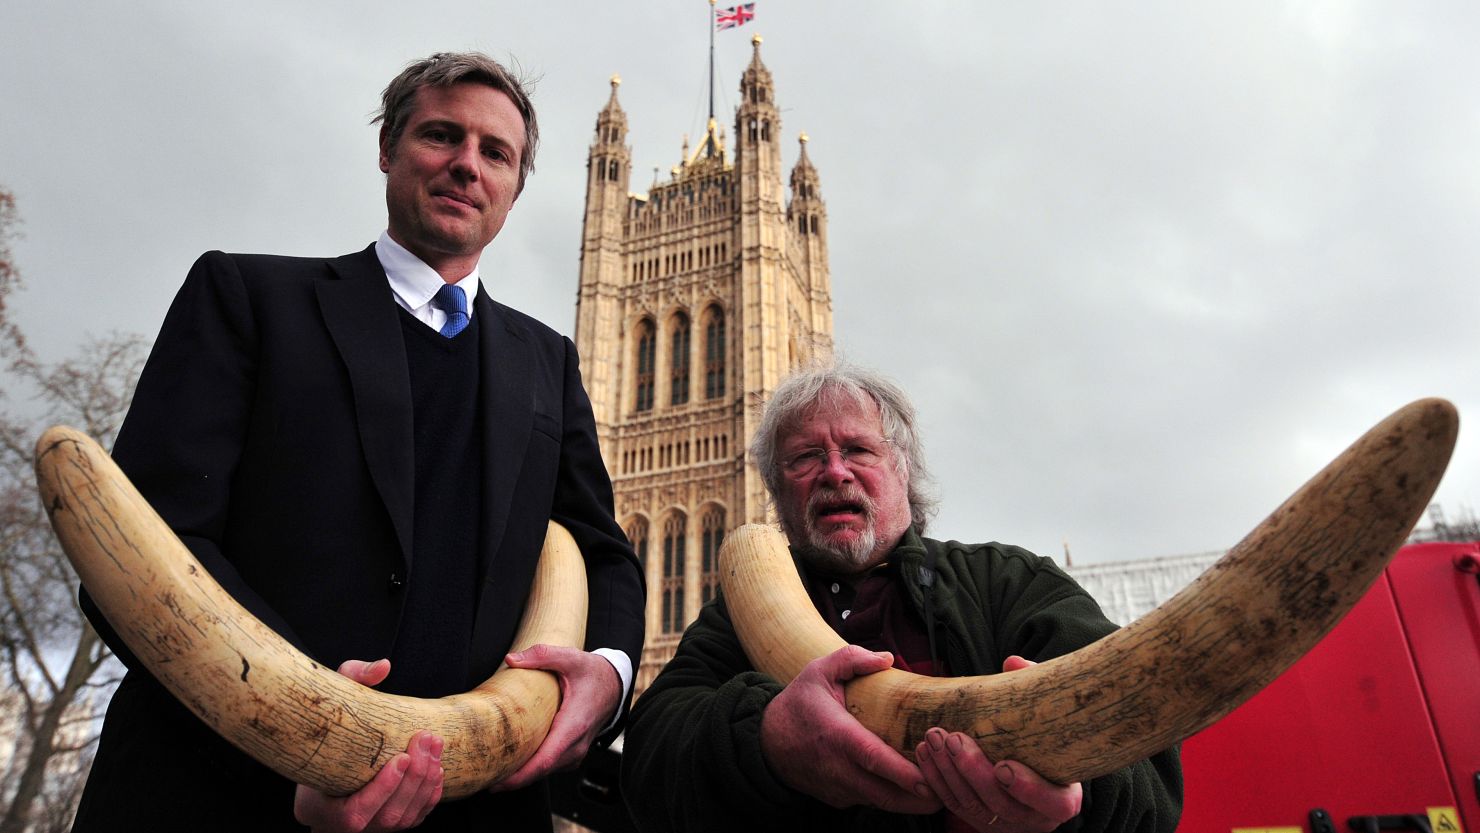 British MP Zac Goldsmith (left) and TV personality Bill Oddie in central London on February 10, 2014.